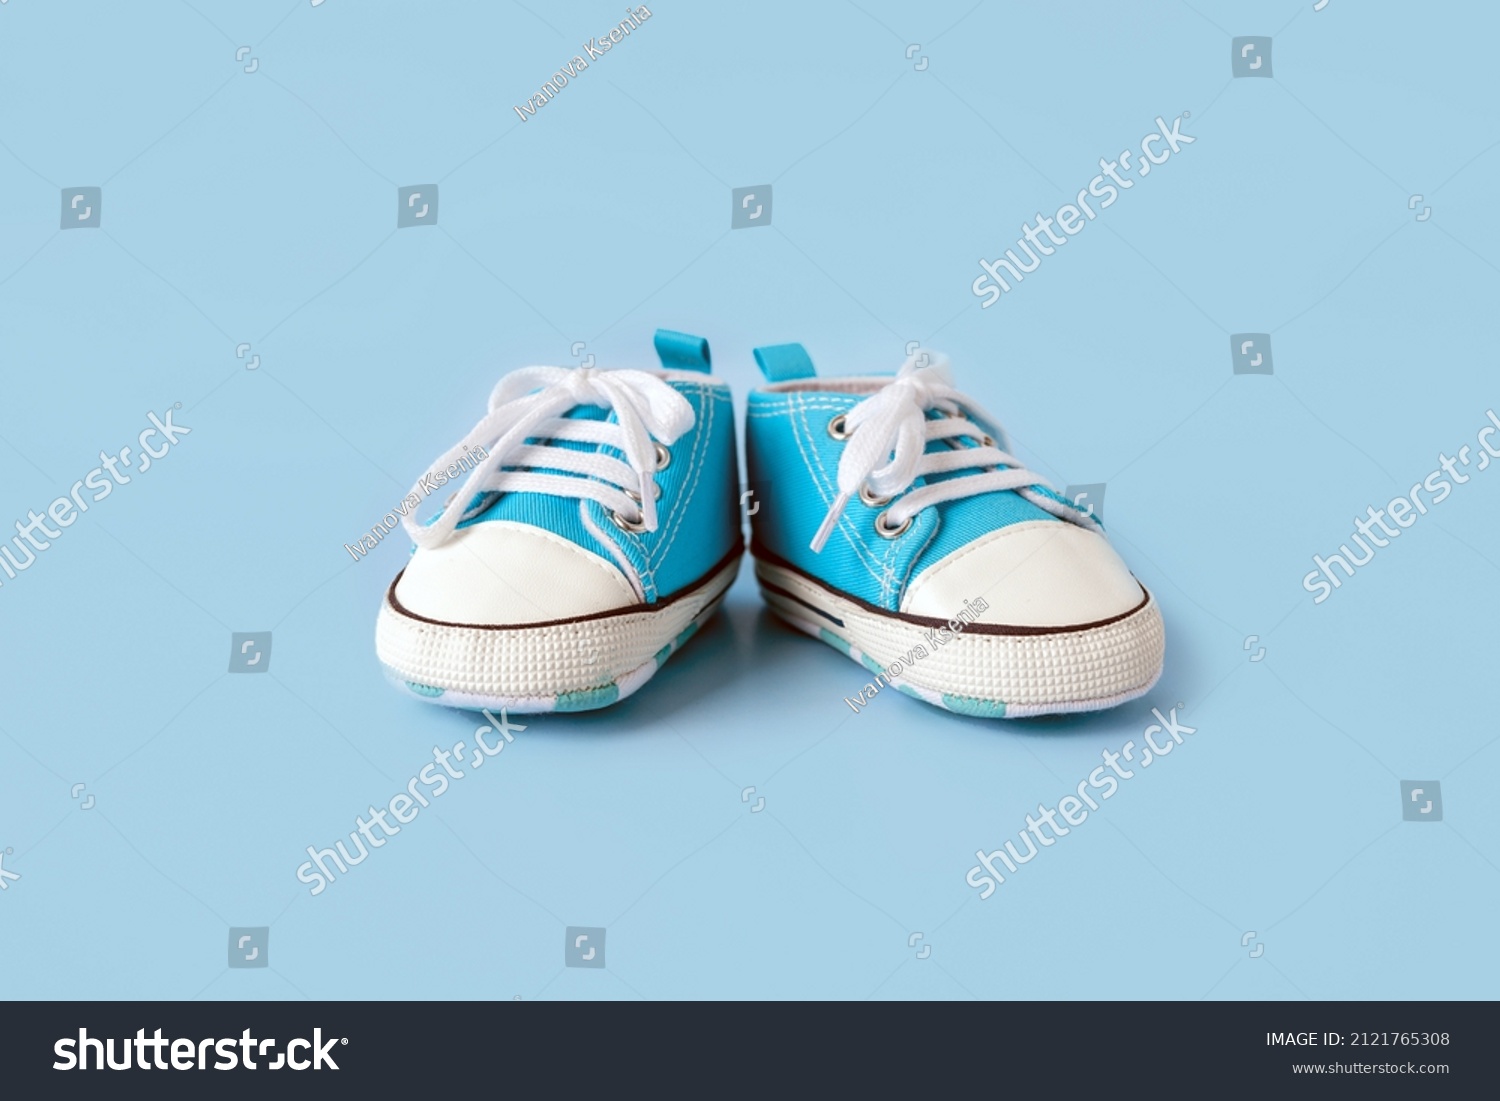 Baby's little blue sneakers on a colorful background. The concept of waiting for a baby and the concept of traveling with baby, children's lifestyle. Copy space, flat lay #2121765308